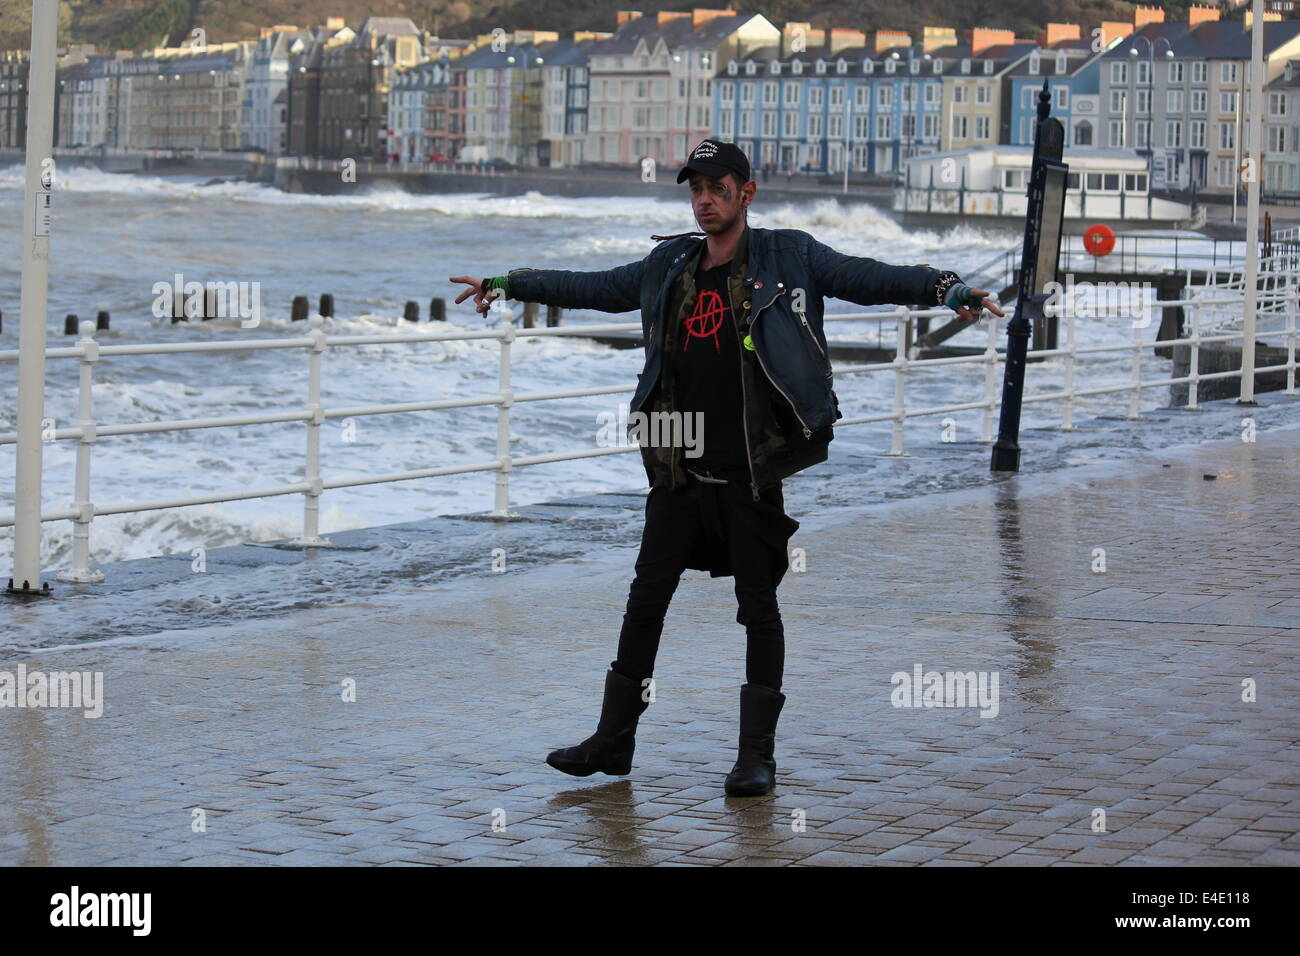 A punk style man posing in front of stormy seas on Aberystwyth promenade Stock Photo